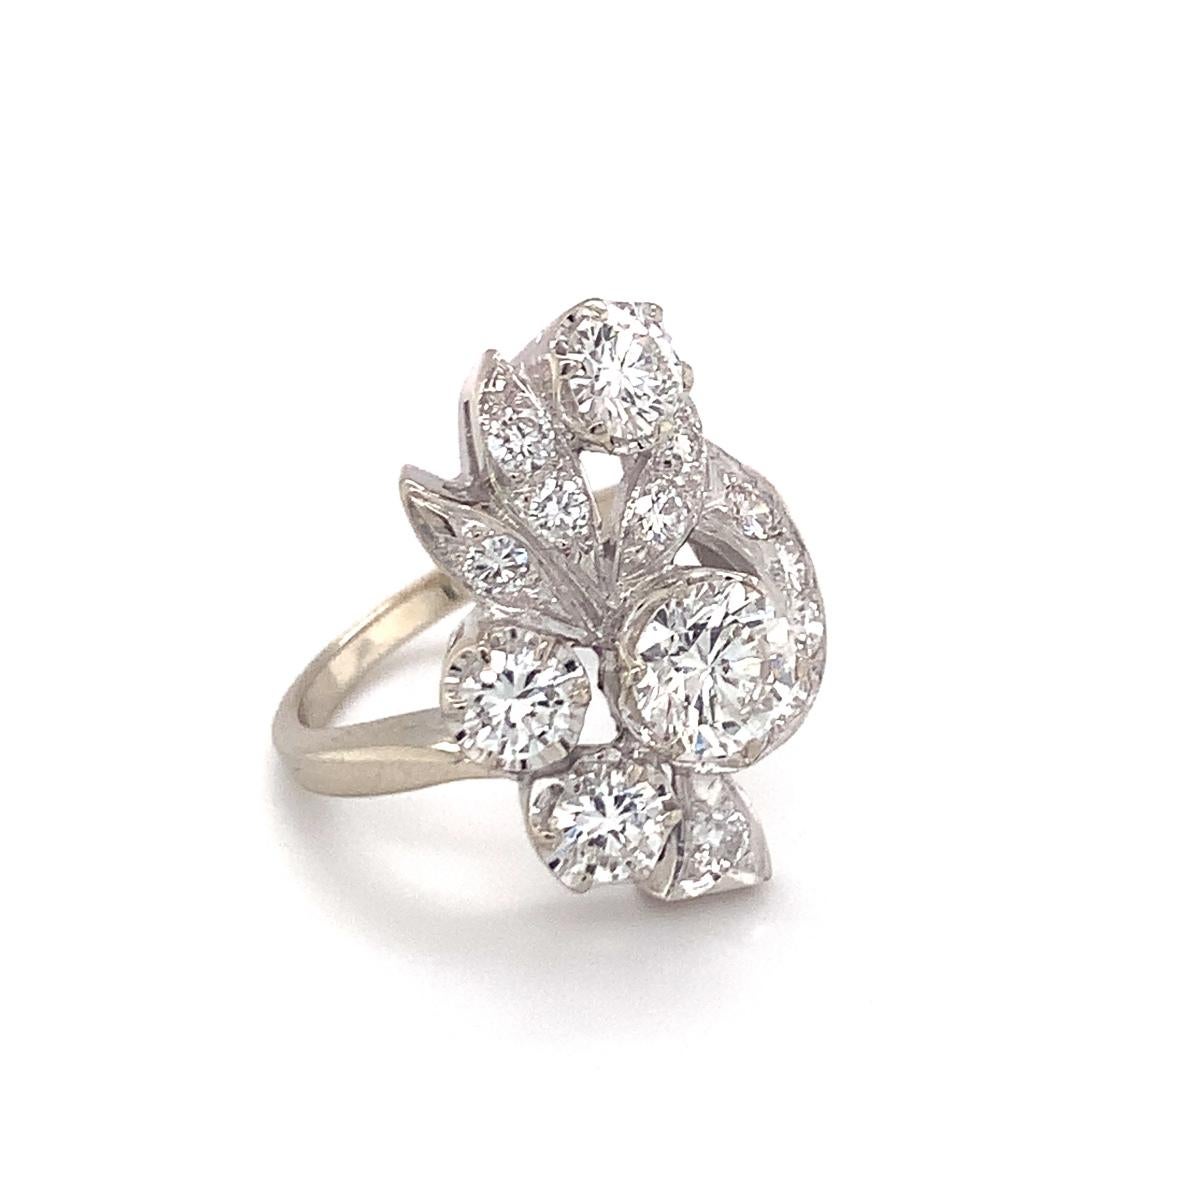 One mid-century diamond cluster dinner ring in 14K white gold centering one round brilliant cut diamond weighing approximately 1.06 ct. with 14 round brilliant cut diamonds surrounding totaling approximately 1.73 ct. 

Floral, shimmering,